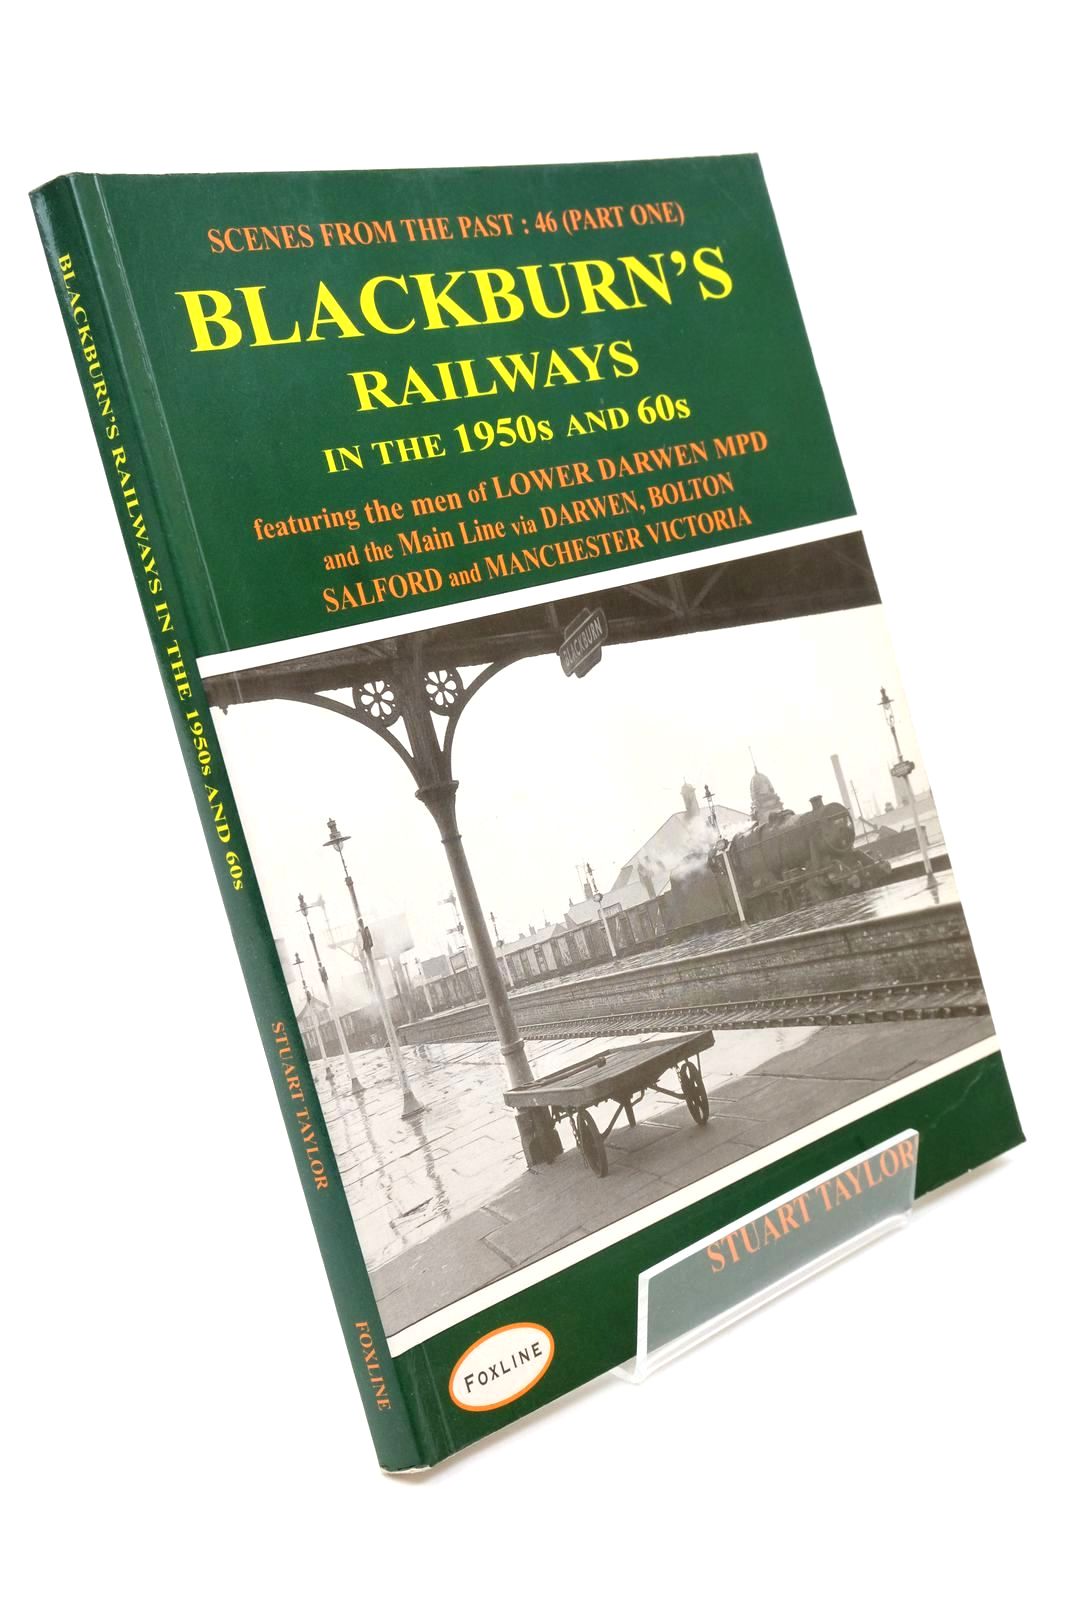 Photo of BLACKBURN'S RAILWAYS IN THE 1950'S AND '60'S (SCENES FROM THE PAST: 46 PART ONE)- Stock Number: 1322458